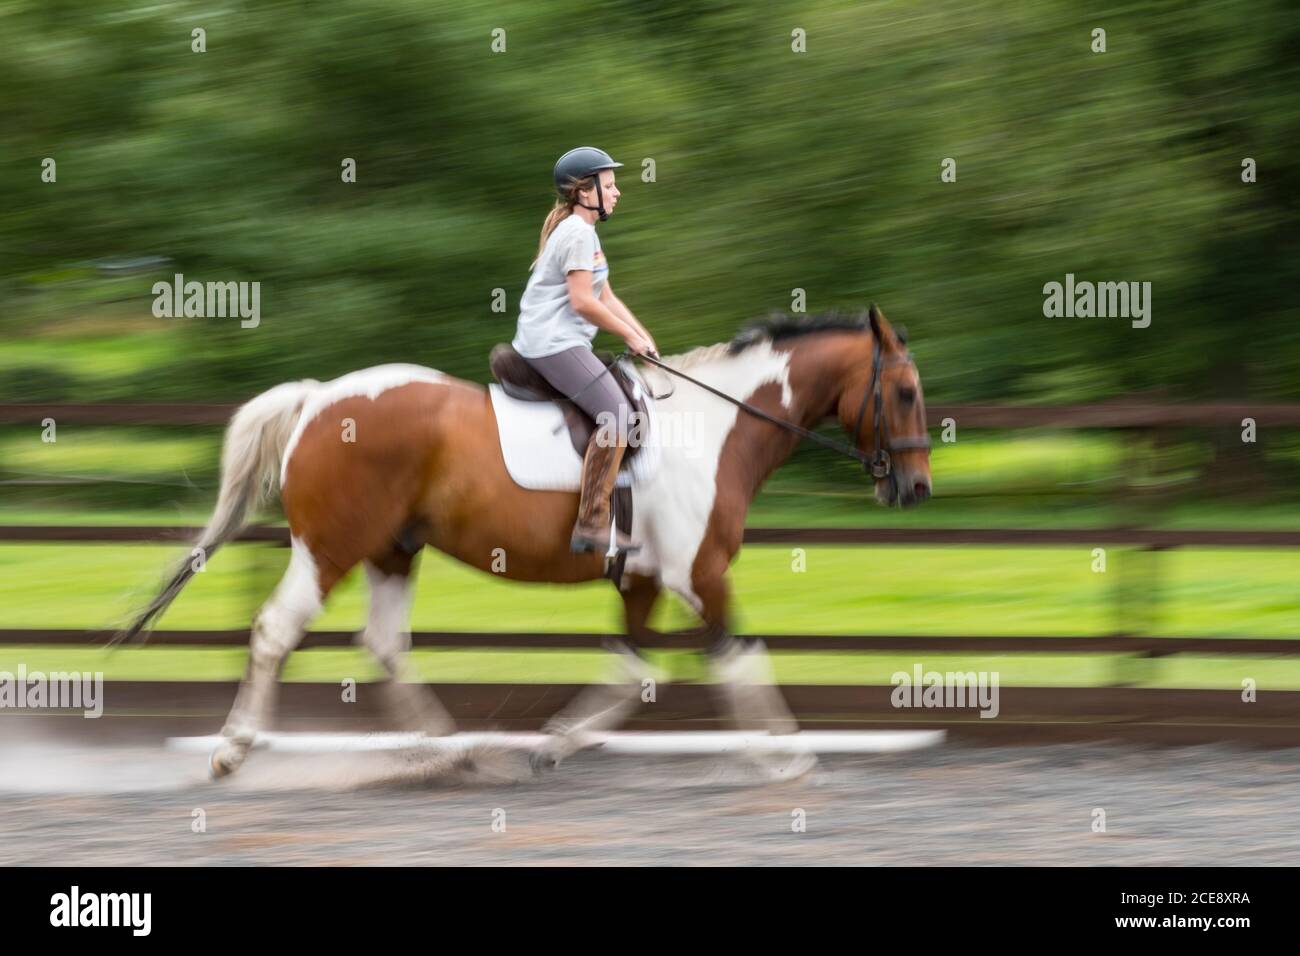 Riding a horse at speed in the menage. Stock Photo